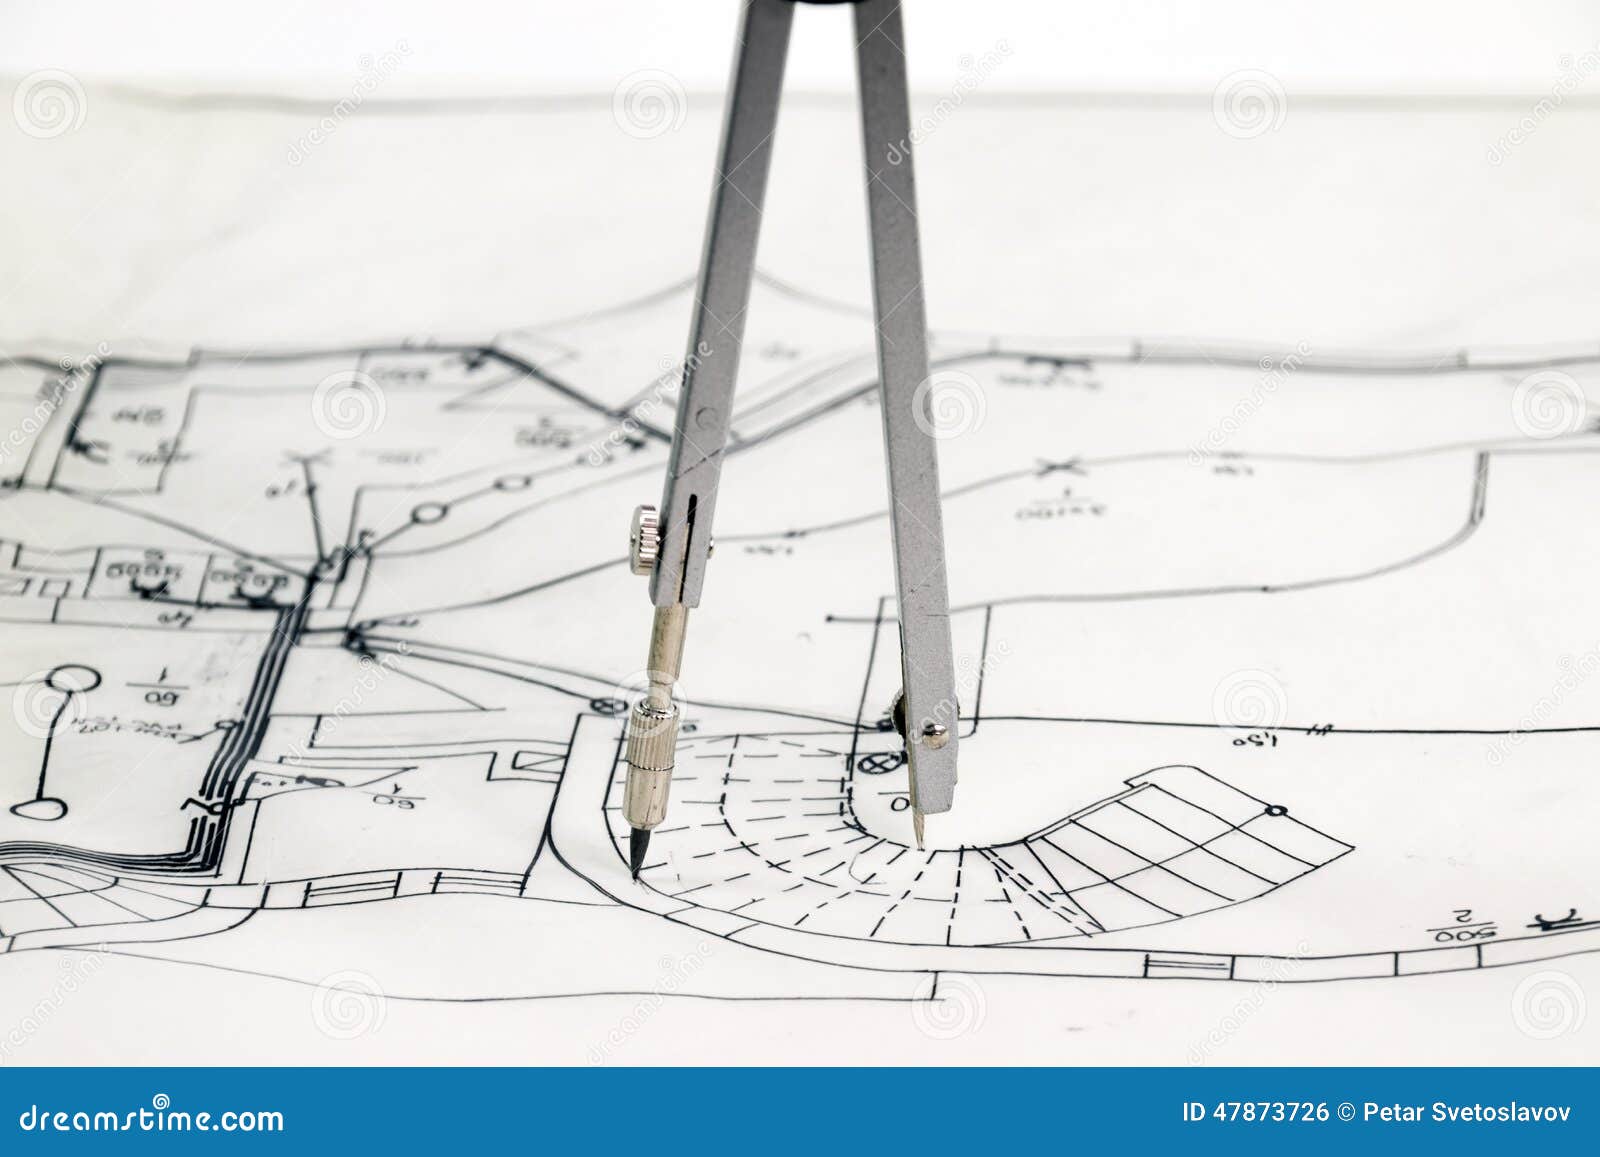 Residential house site plan and location map drawing details dwg file   Cadbull